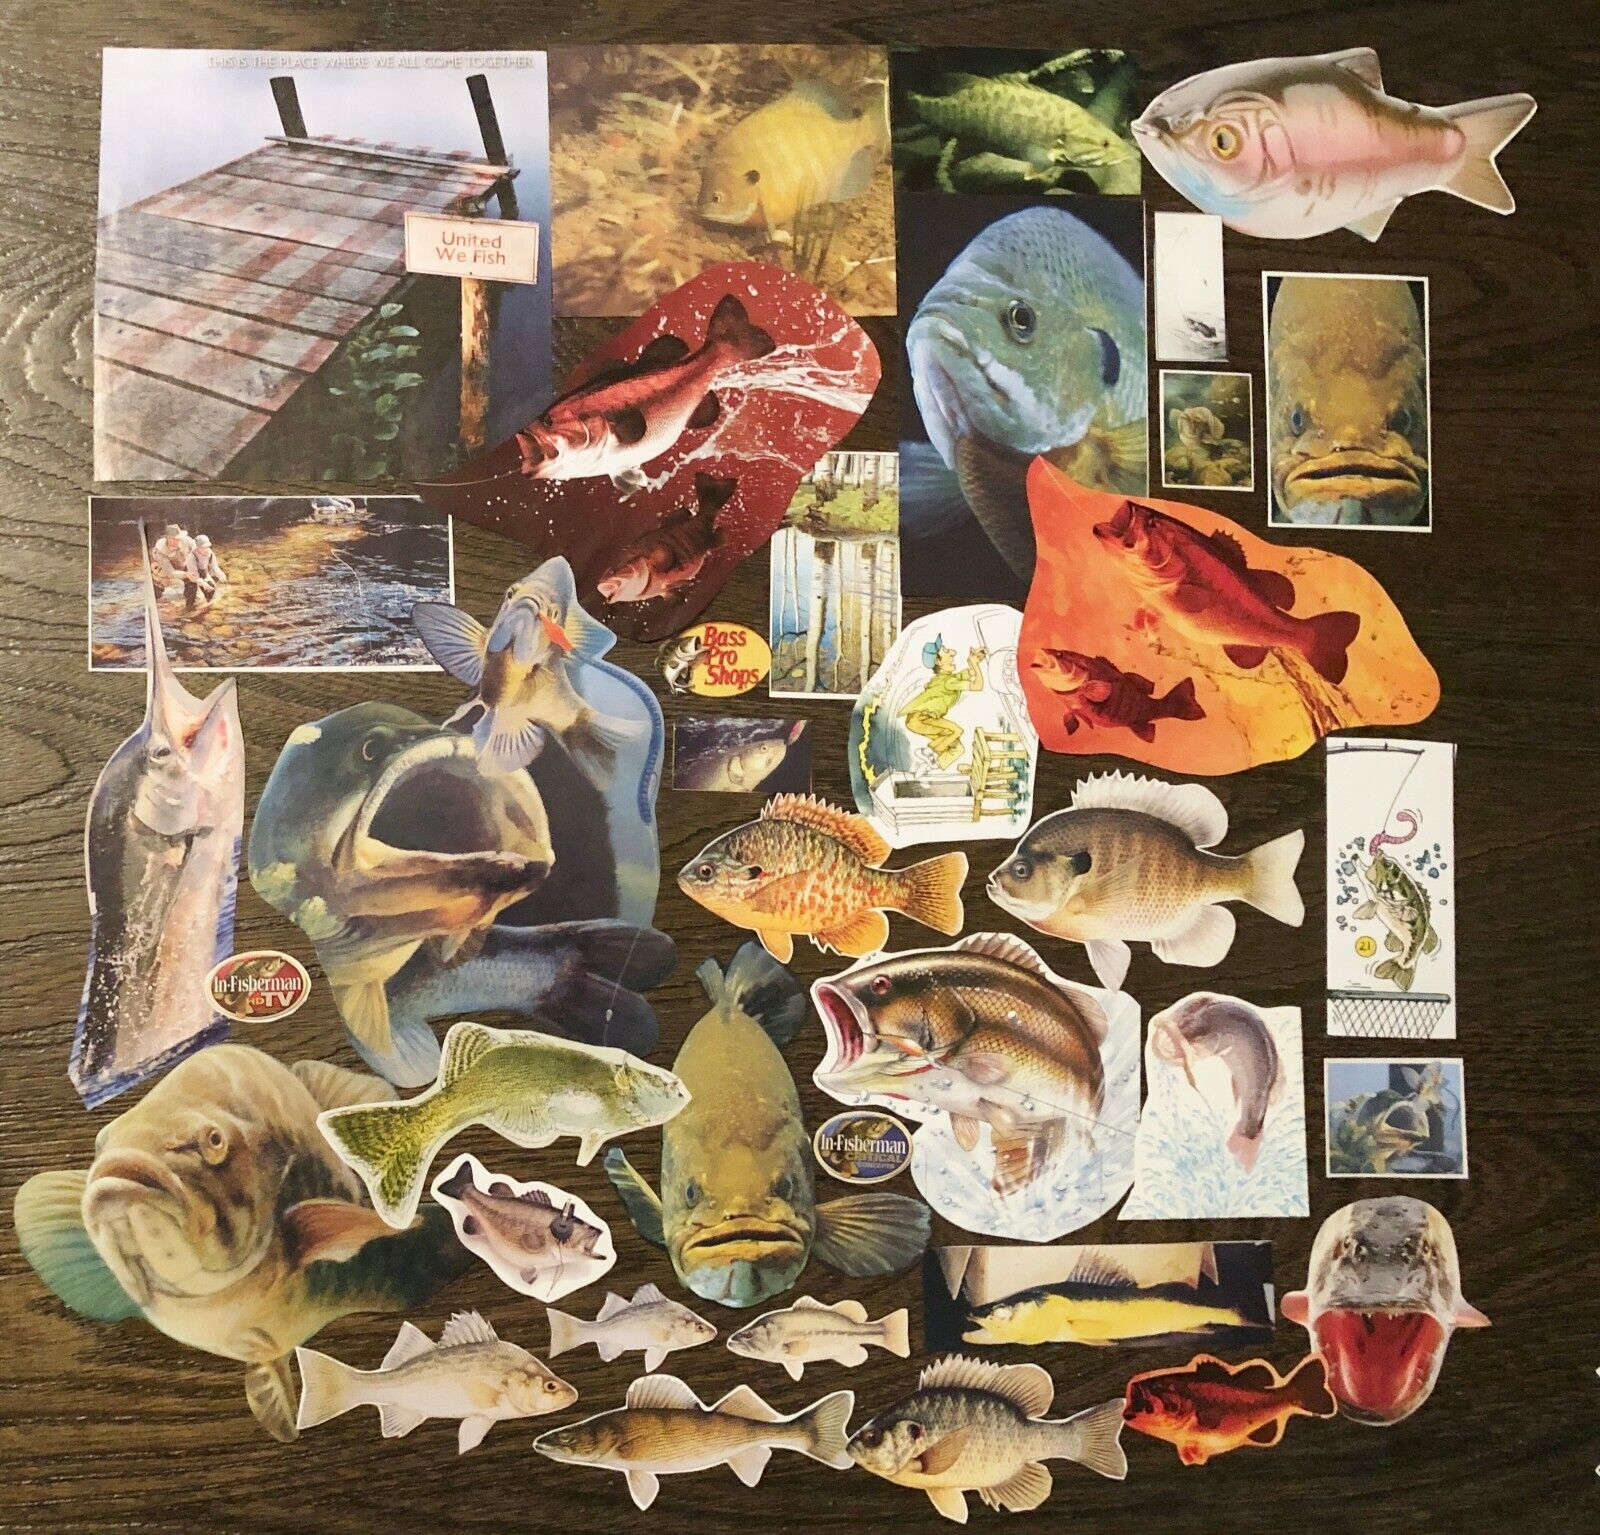 Vtg GONE FISHING! Fish Pics&Ads~Man Cave Junk Journal,Collage Art Scrap Book Lot Unbranded Does Not Apply